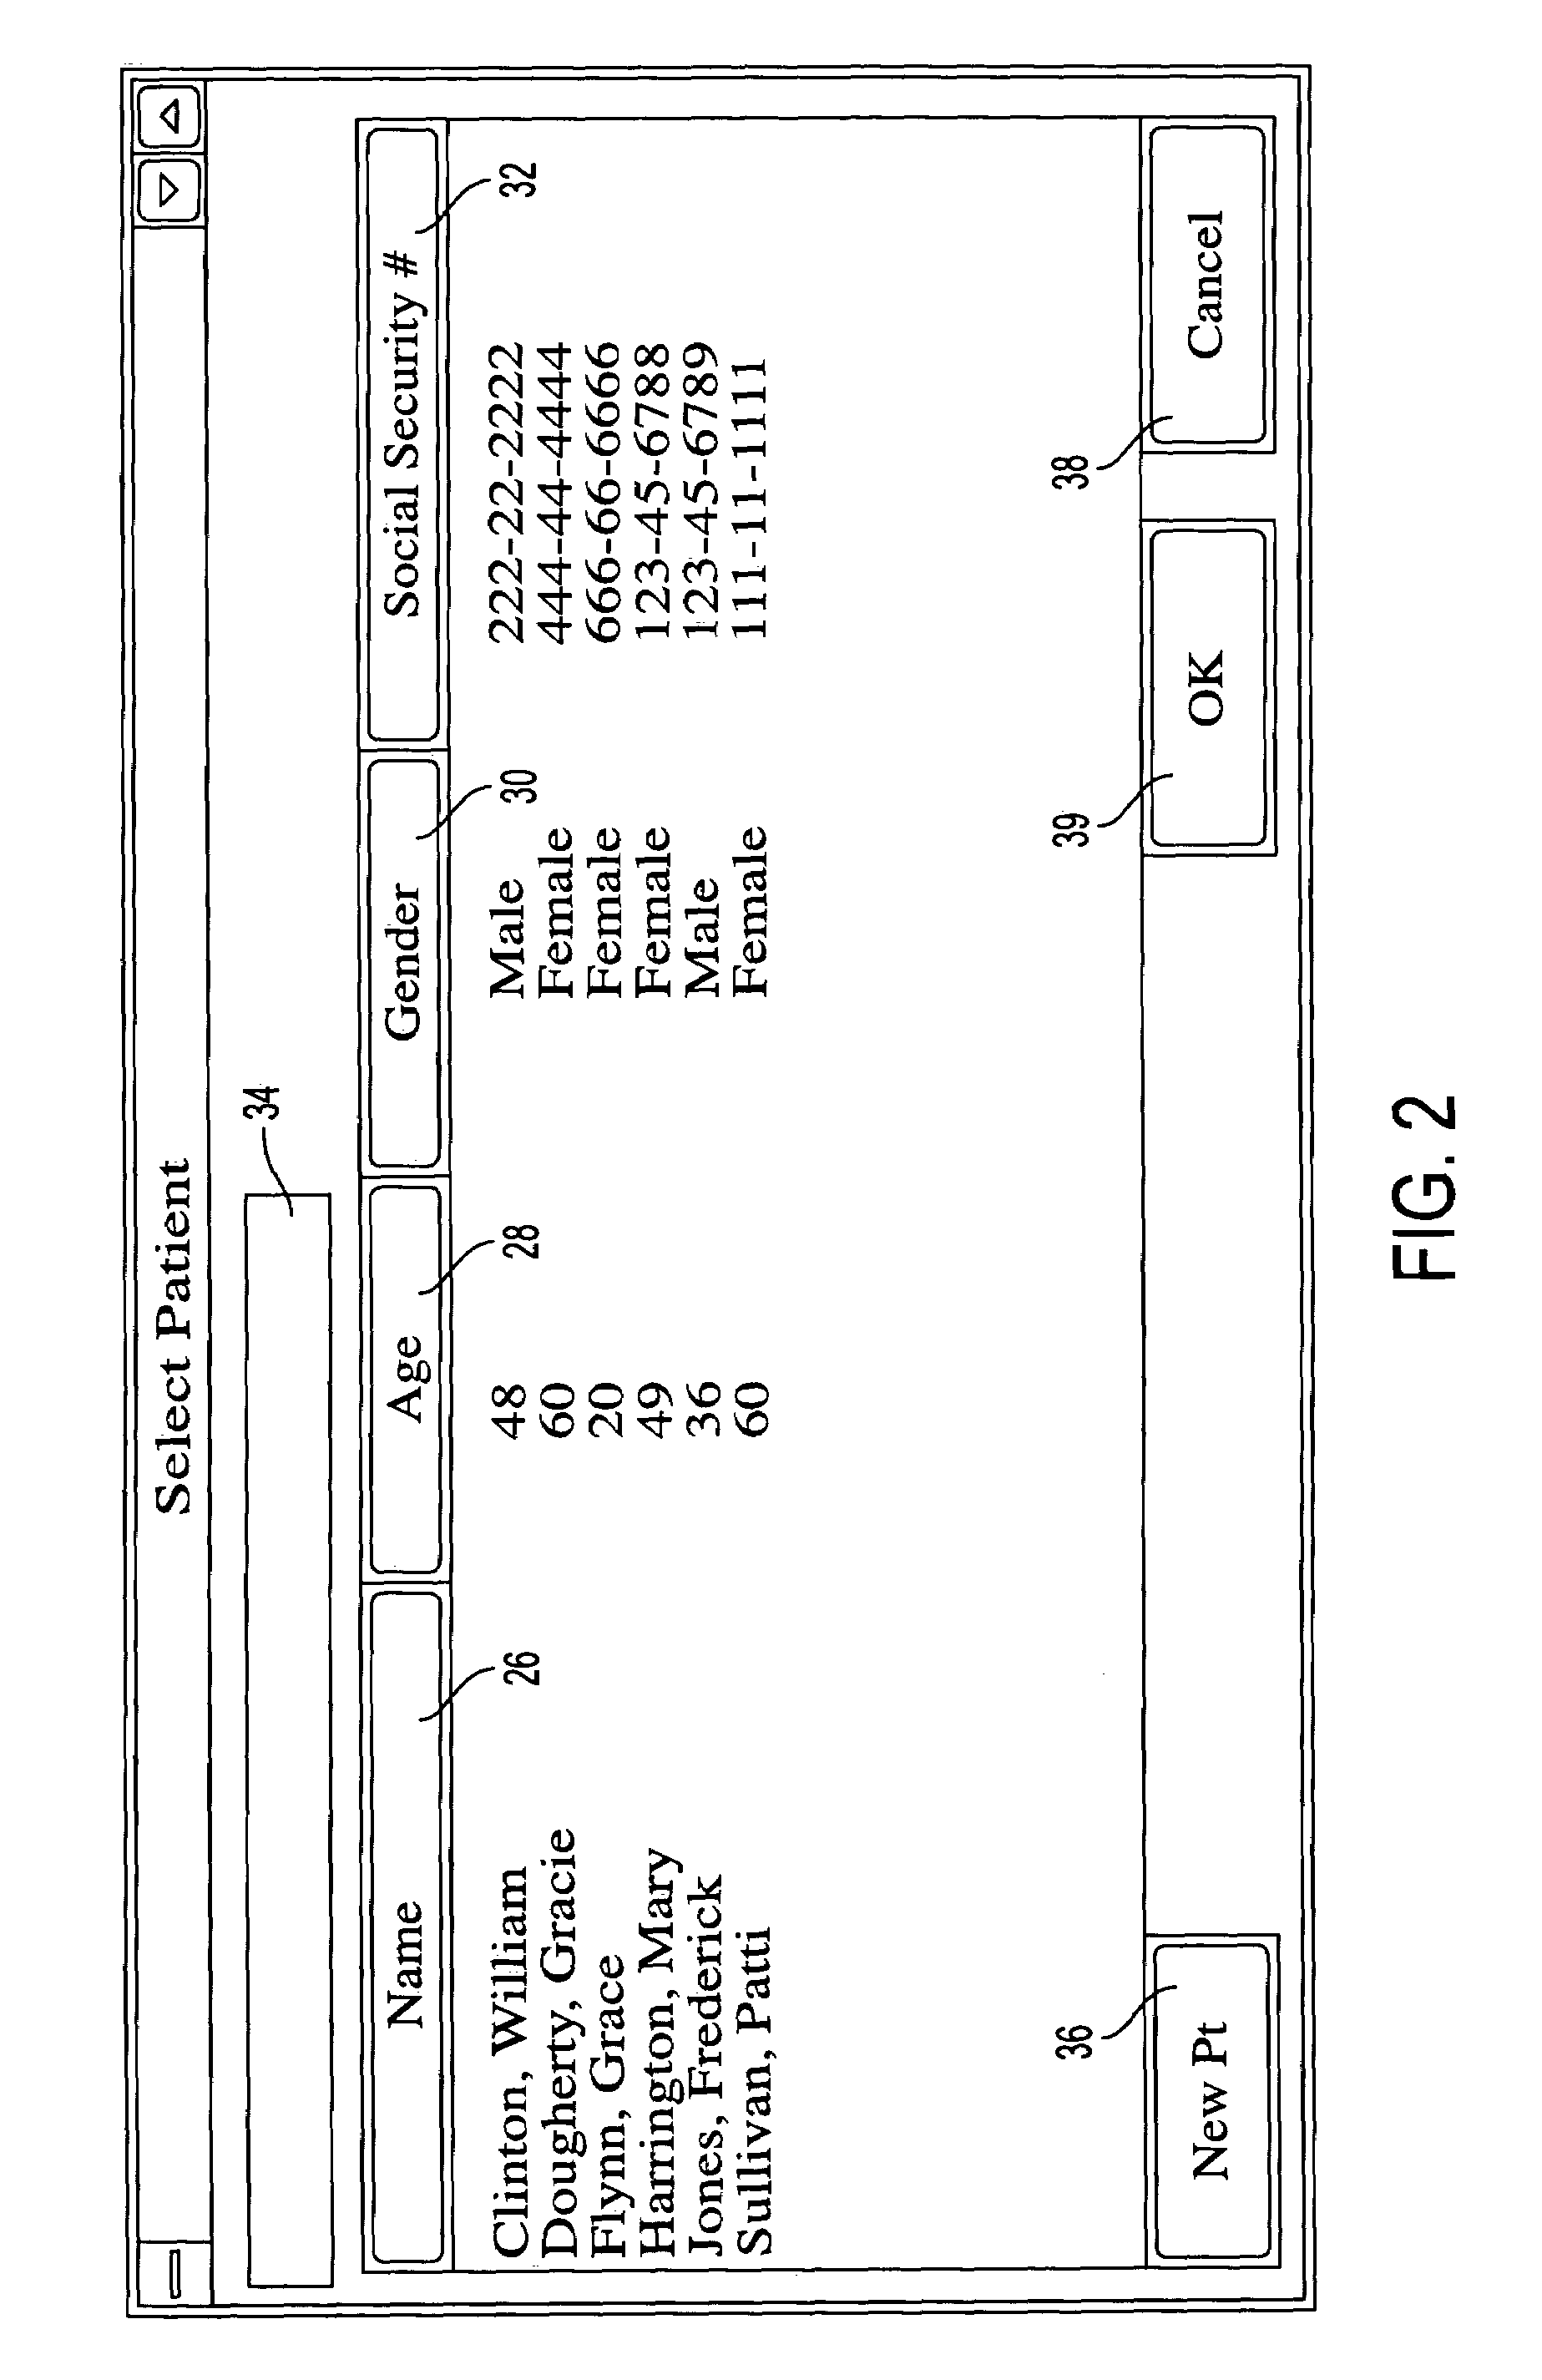 Computerized prescription system for gathering and presenting information relating to pharmaceuticals